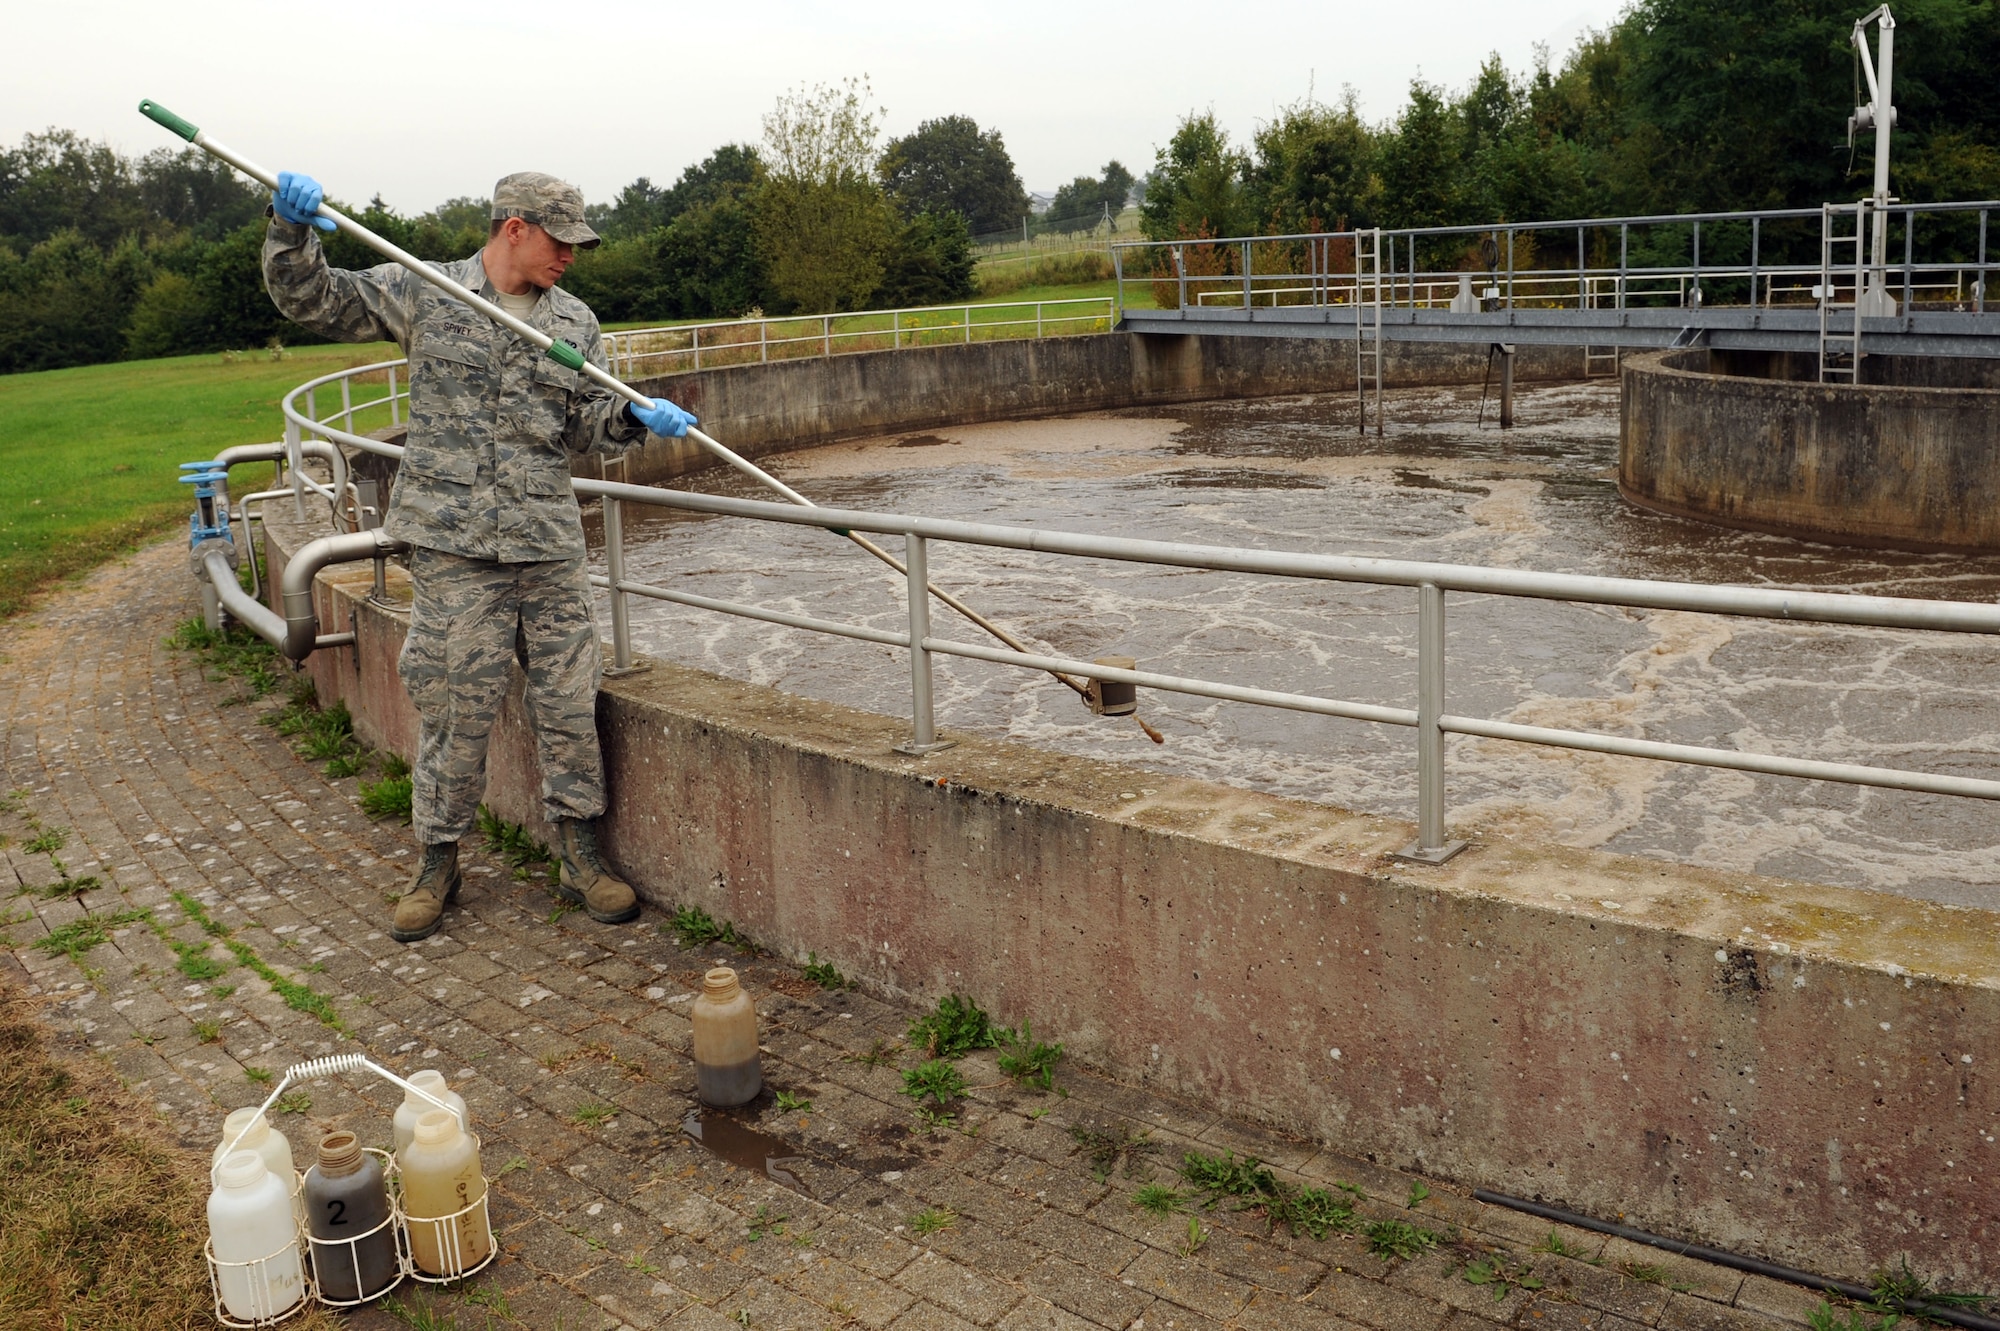 SPANGDAHLEM AIR BASE, Germany –Senior Airman David Spivey, 52nd Civil Engineer Squadron water and fuels system maintenance technician, takes a sample of wastewater from a tank during a daily sample inspection at the wastewater treatment facility here Sept. 5. Samples are taken daily from every stage of the treatment process to ensure they meet German environmental standards. The facility processes wastewater from the base to remove any hazardous chemicals it may contain before it is released back into the environment. (U.S. Air Force photo by Senior Airman Christopher Toon/Released)